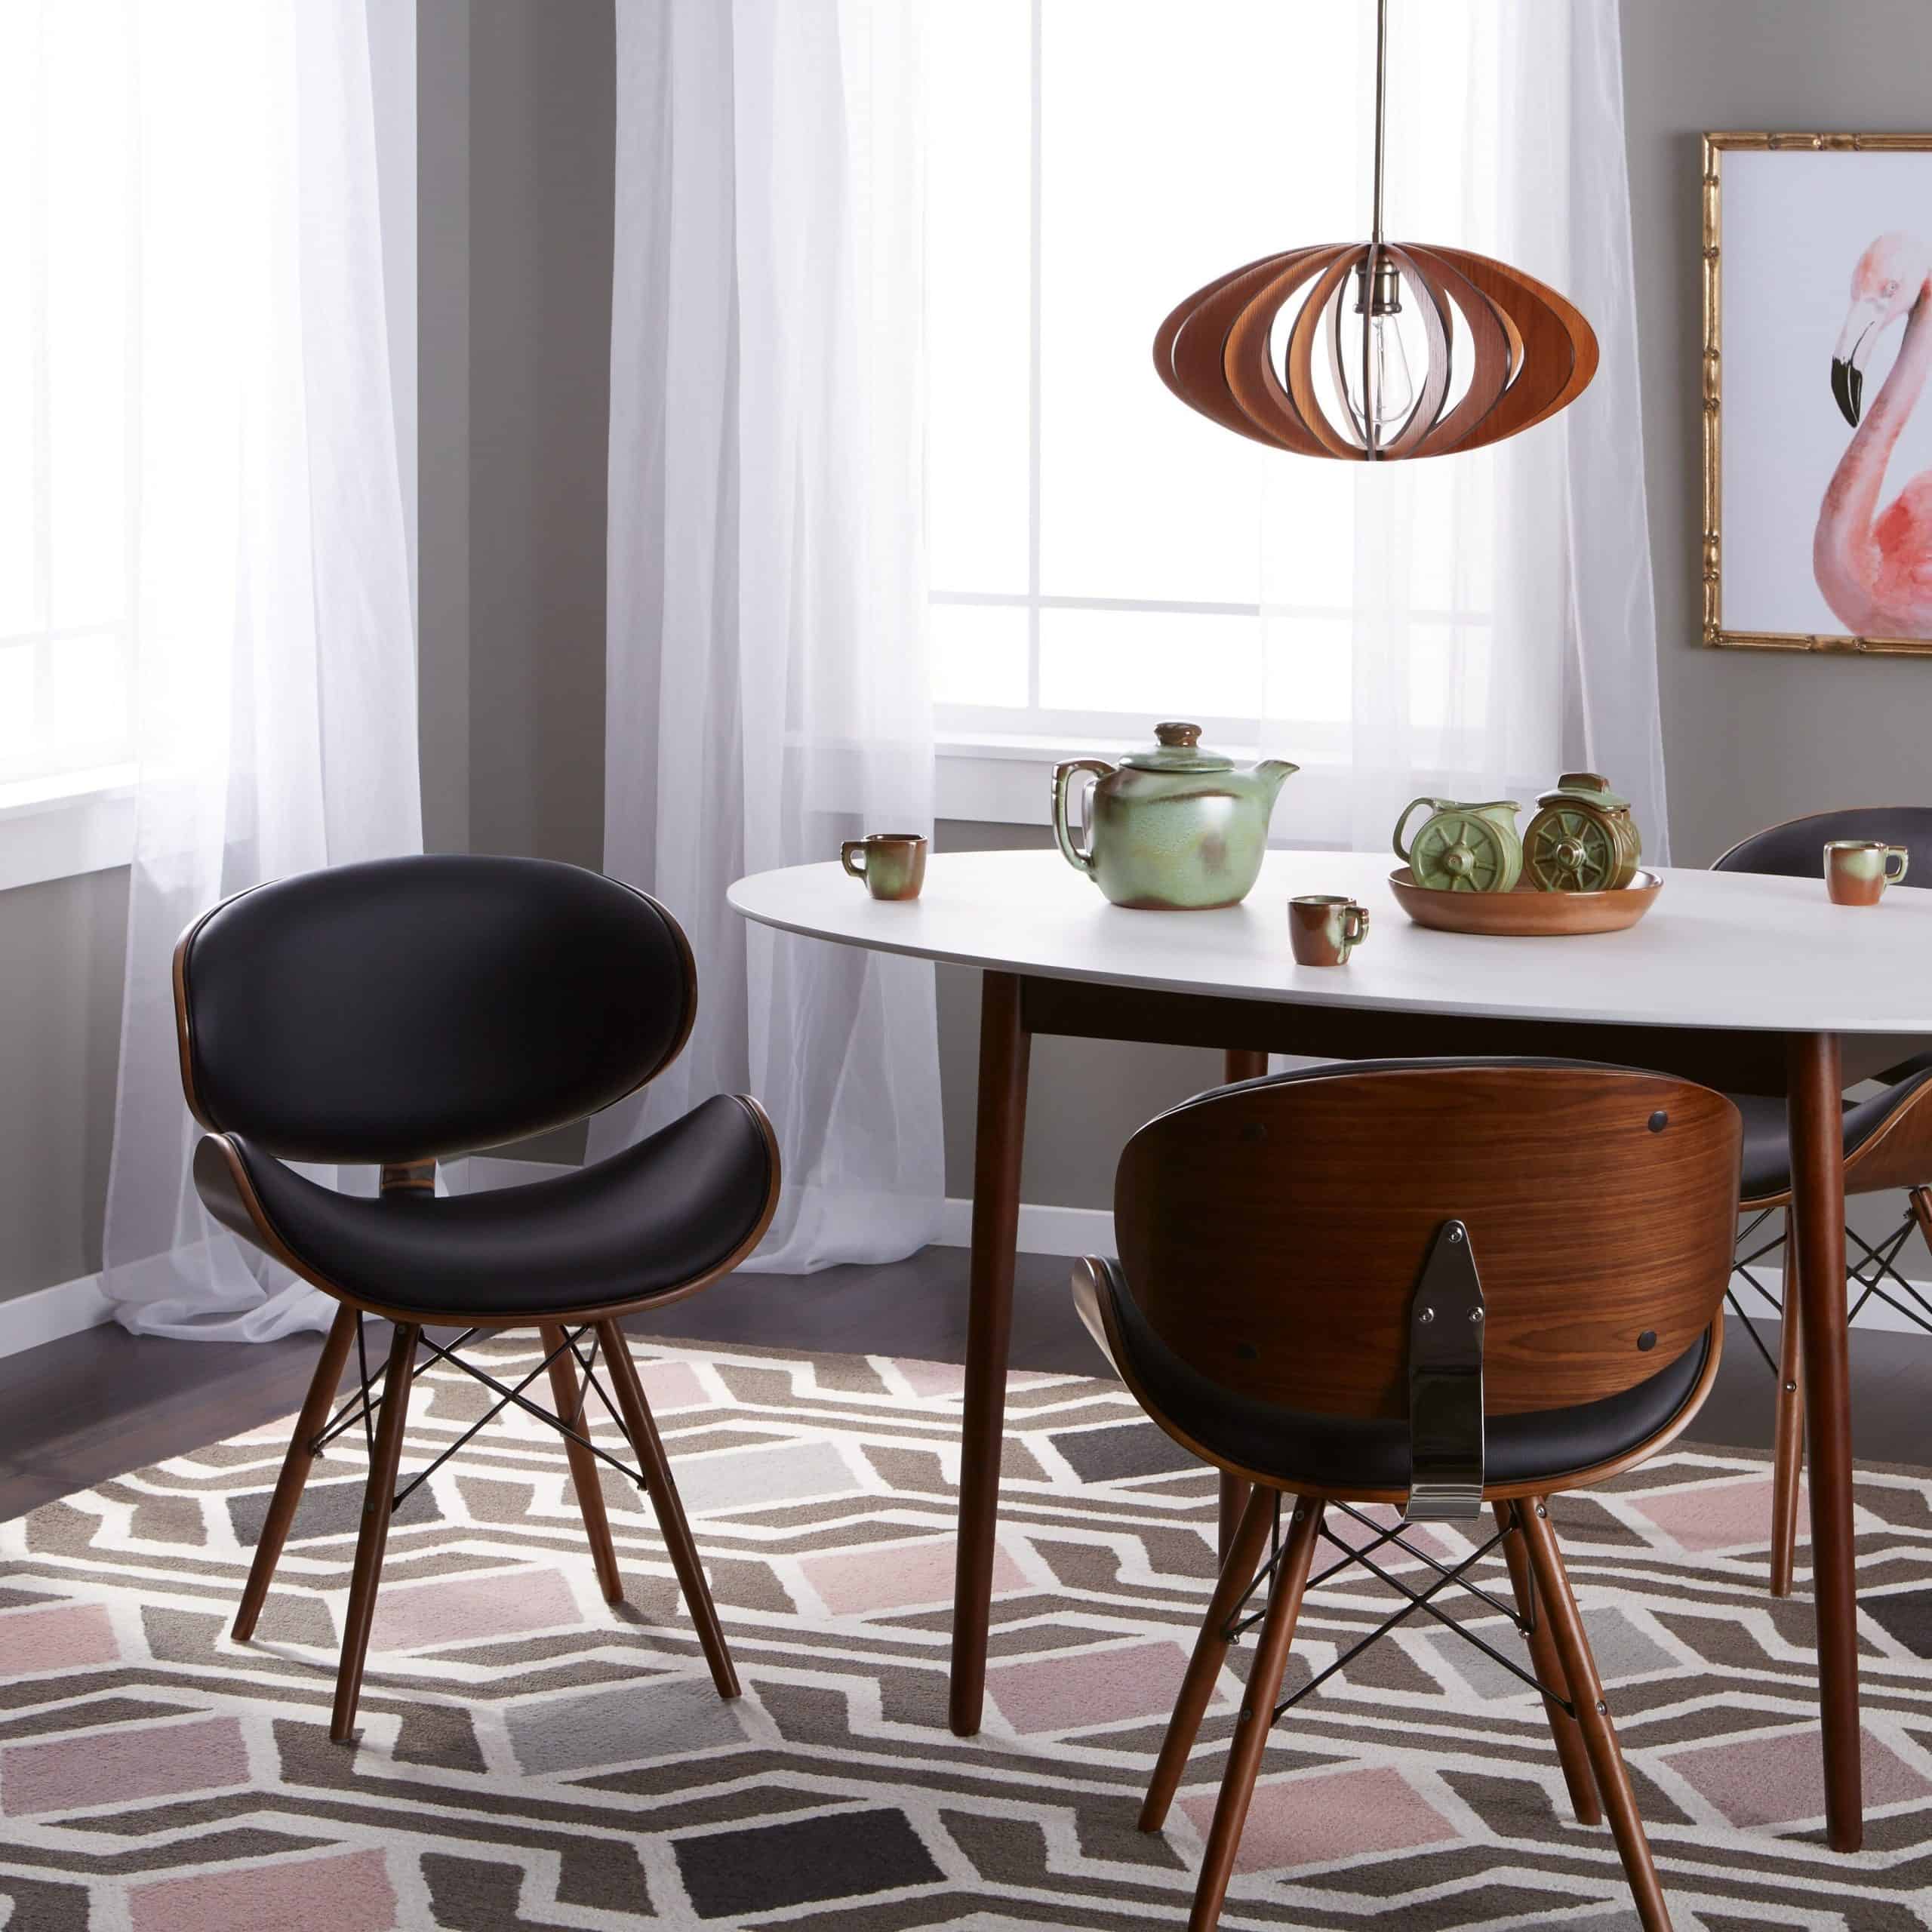 Make a Statement With These Madonna Dining Chairs